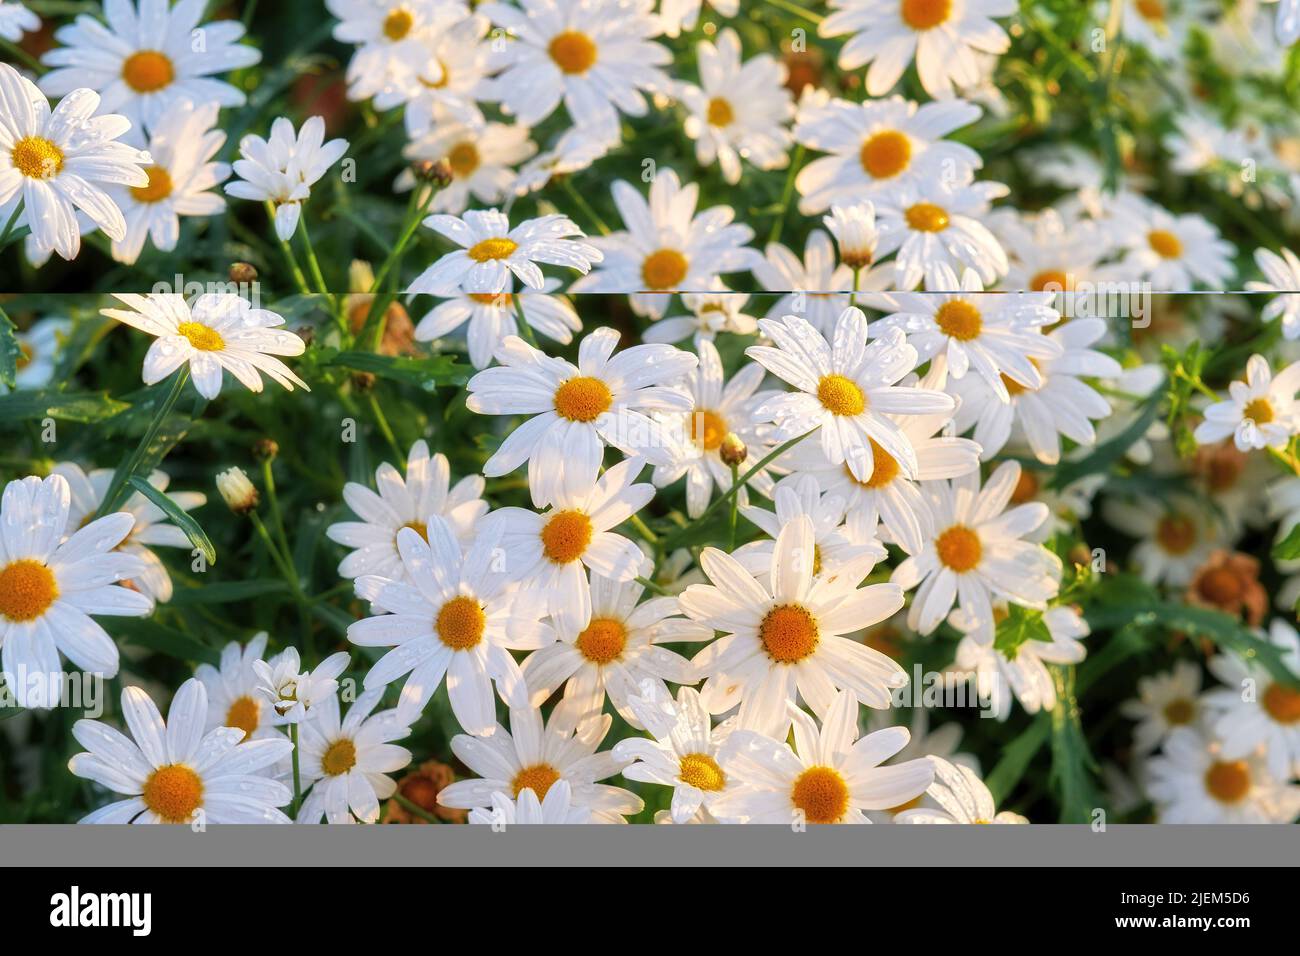 Bunch of white daisies growing in a lush botanical garden in the sun outdoors. Vibrant marguerite or english daisy flowers blooming in spring. Scenic Stock Photo